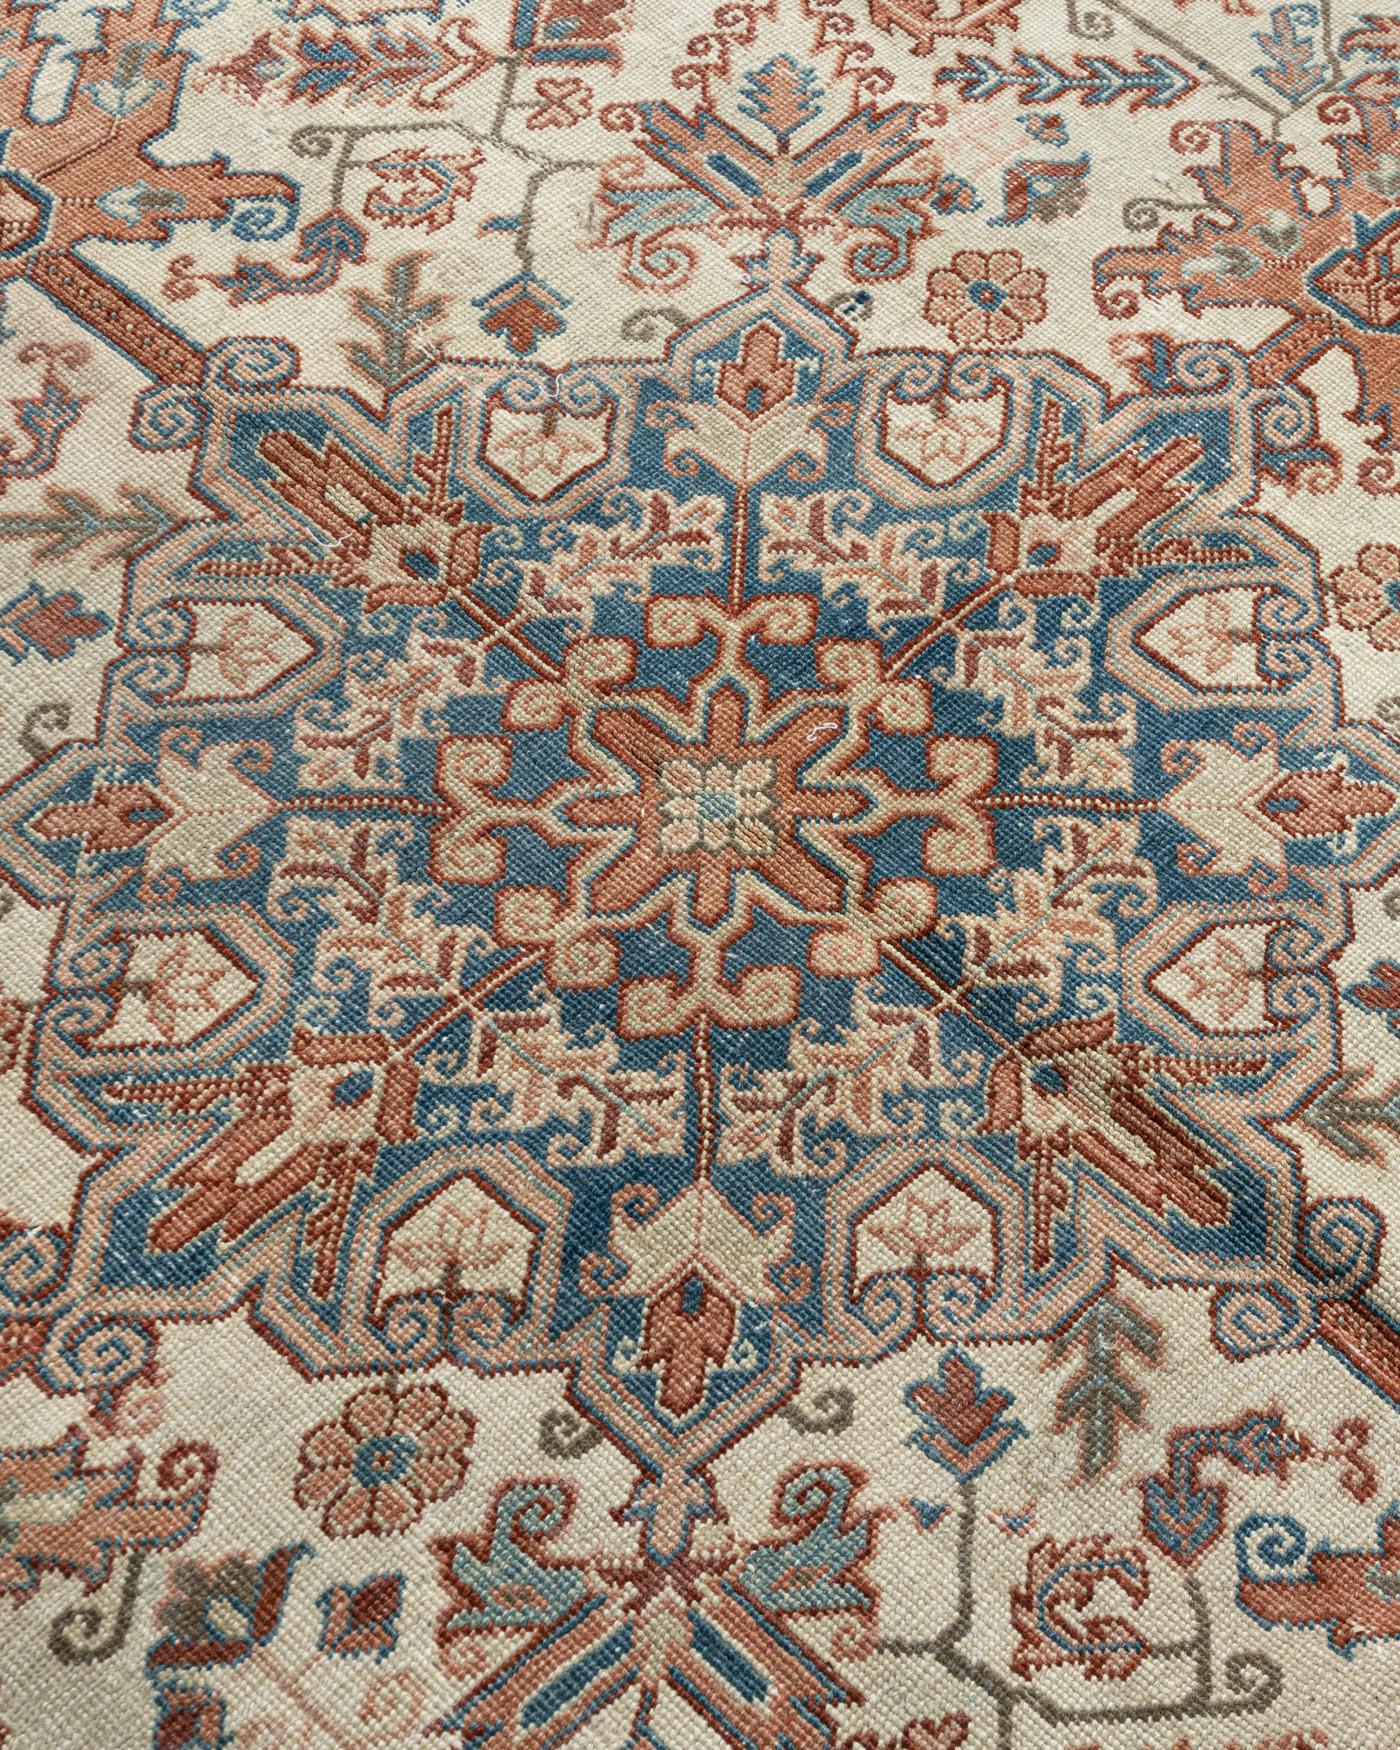 Vintage Persian Heriz rug 8'8 x 11'. Now this luxurious rug is not only a collectible, but also so fashionable! Traditional Heriz area rugs are skillfully woven in vibrant colors and gorgeous geometric designs. The Heriz district of NW Persia has